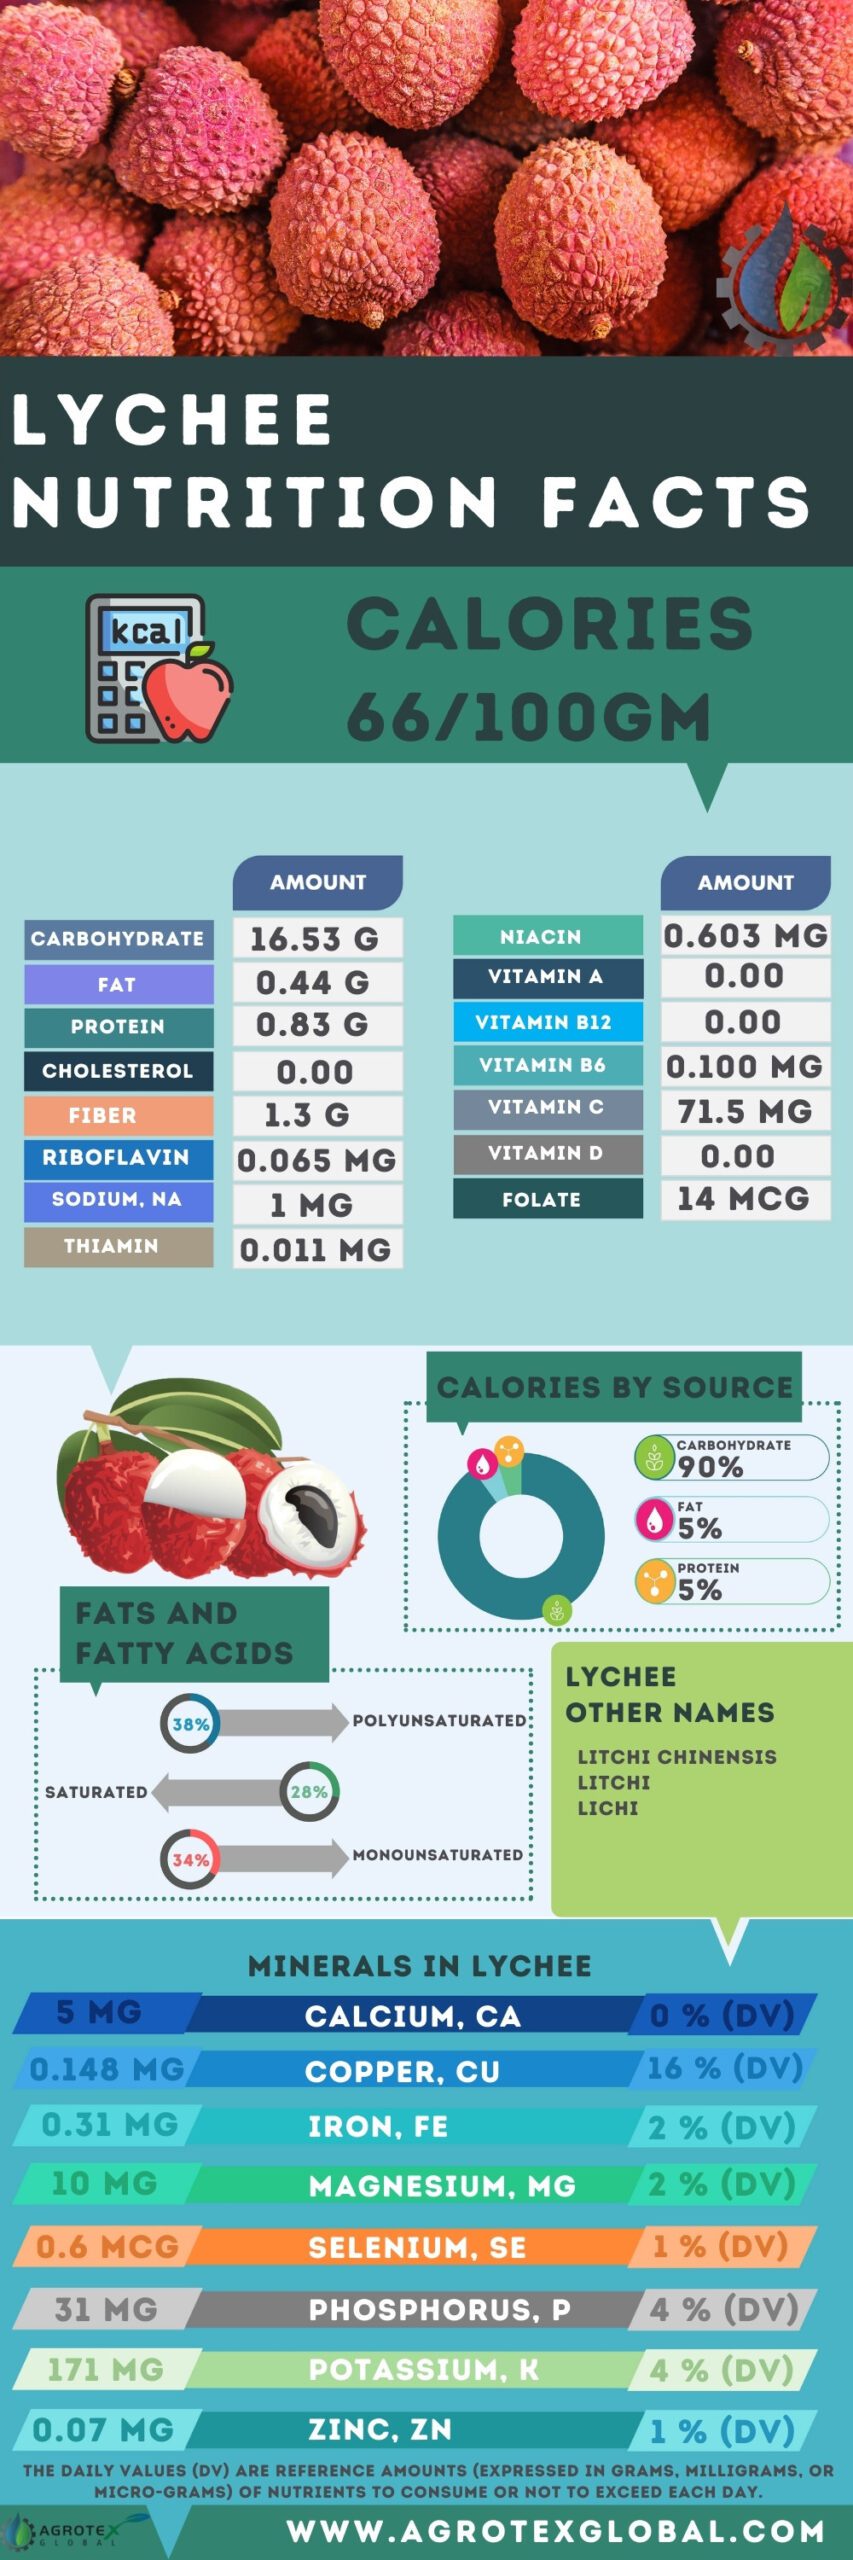 Lychee NUTRITION FACTS infographic chart